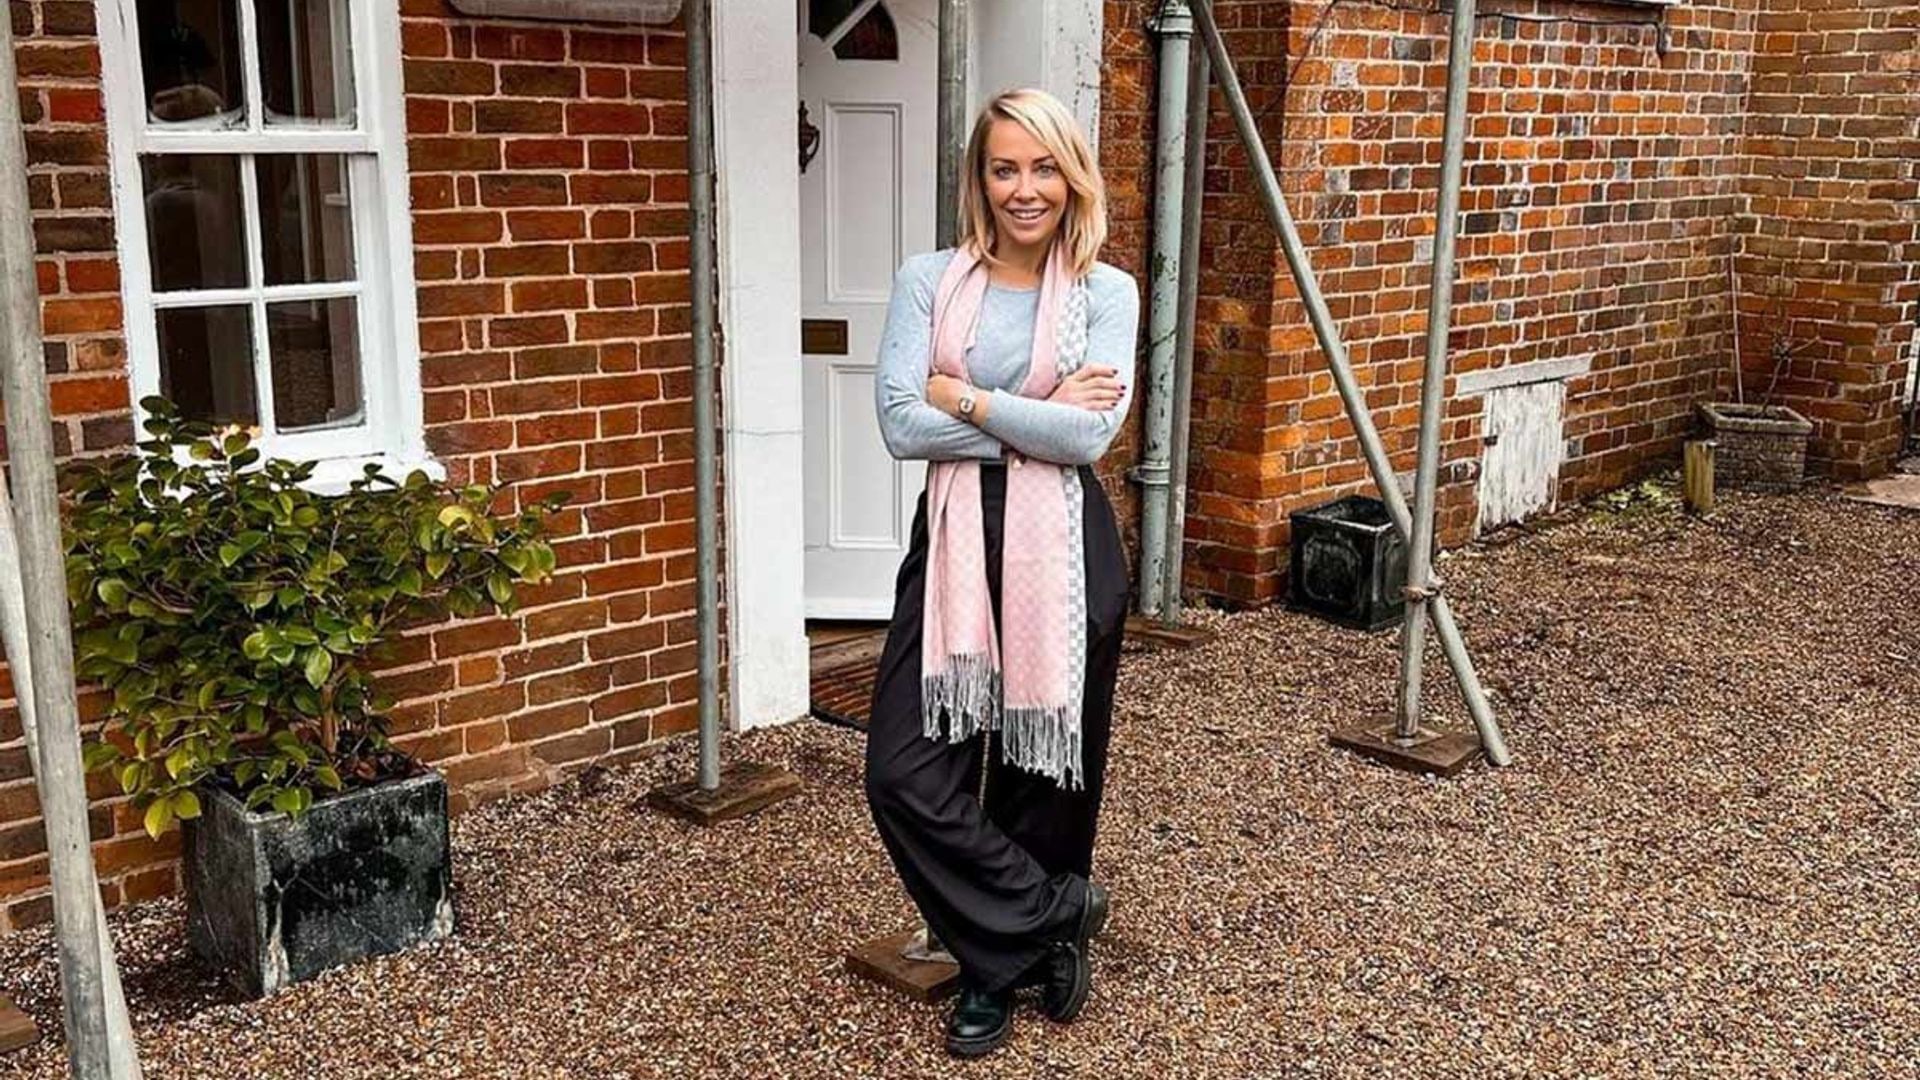 Laura Hamilton reveals 'BIG plans' after moving into new home following surprise split from husband